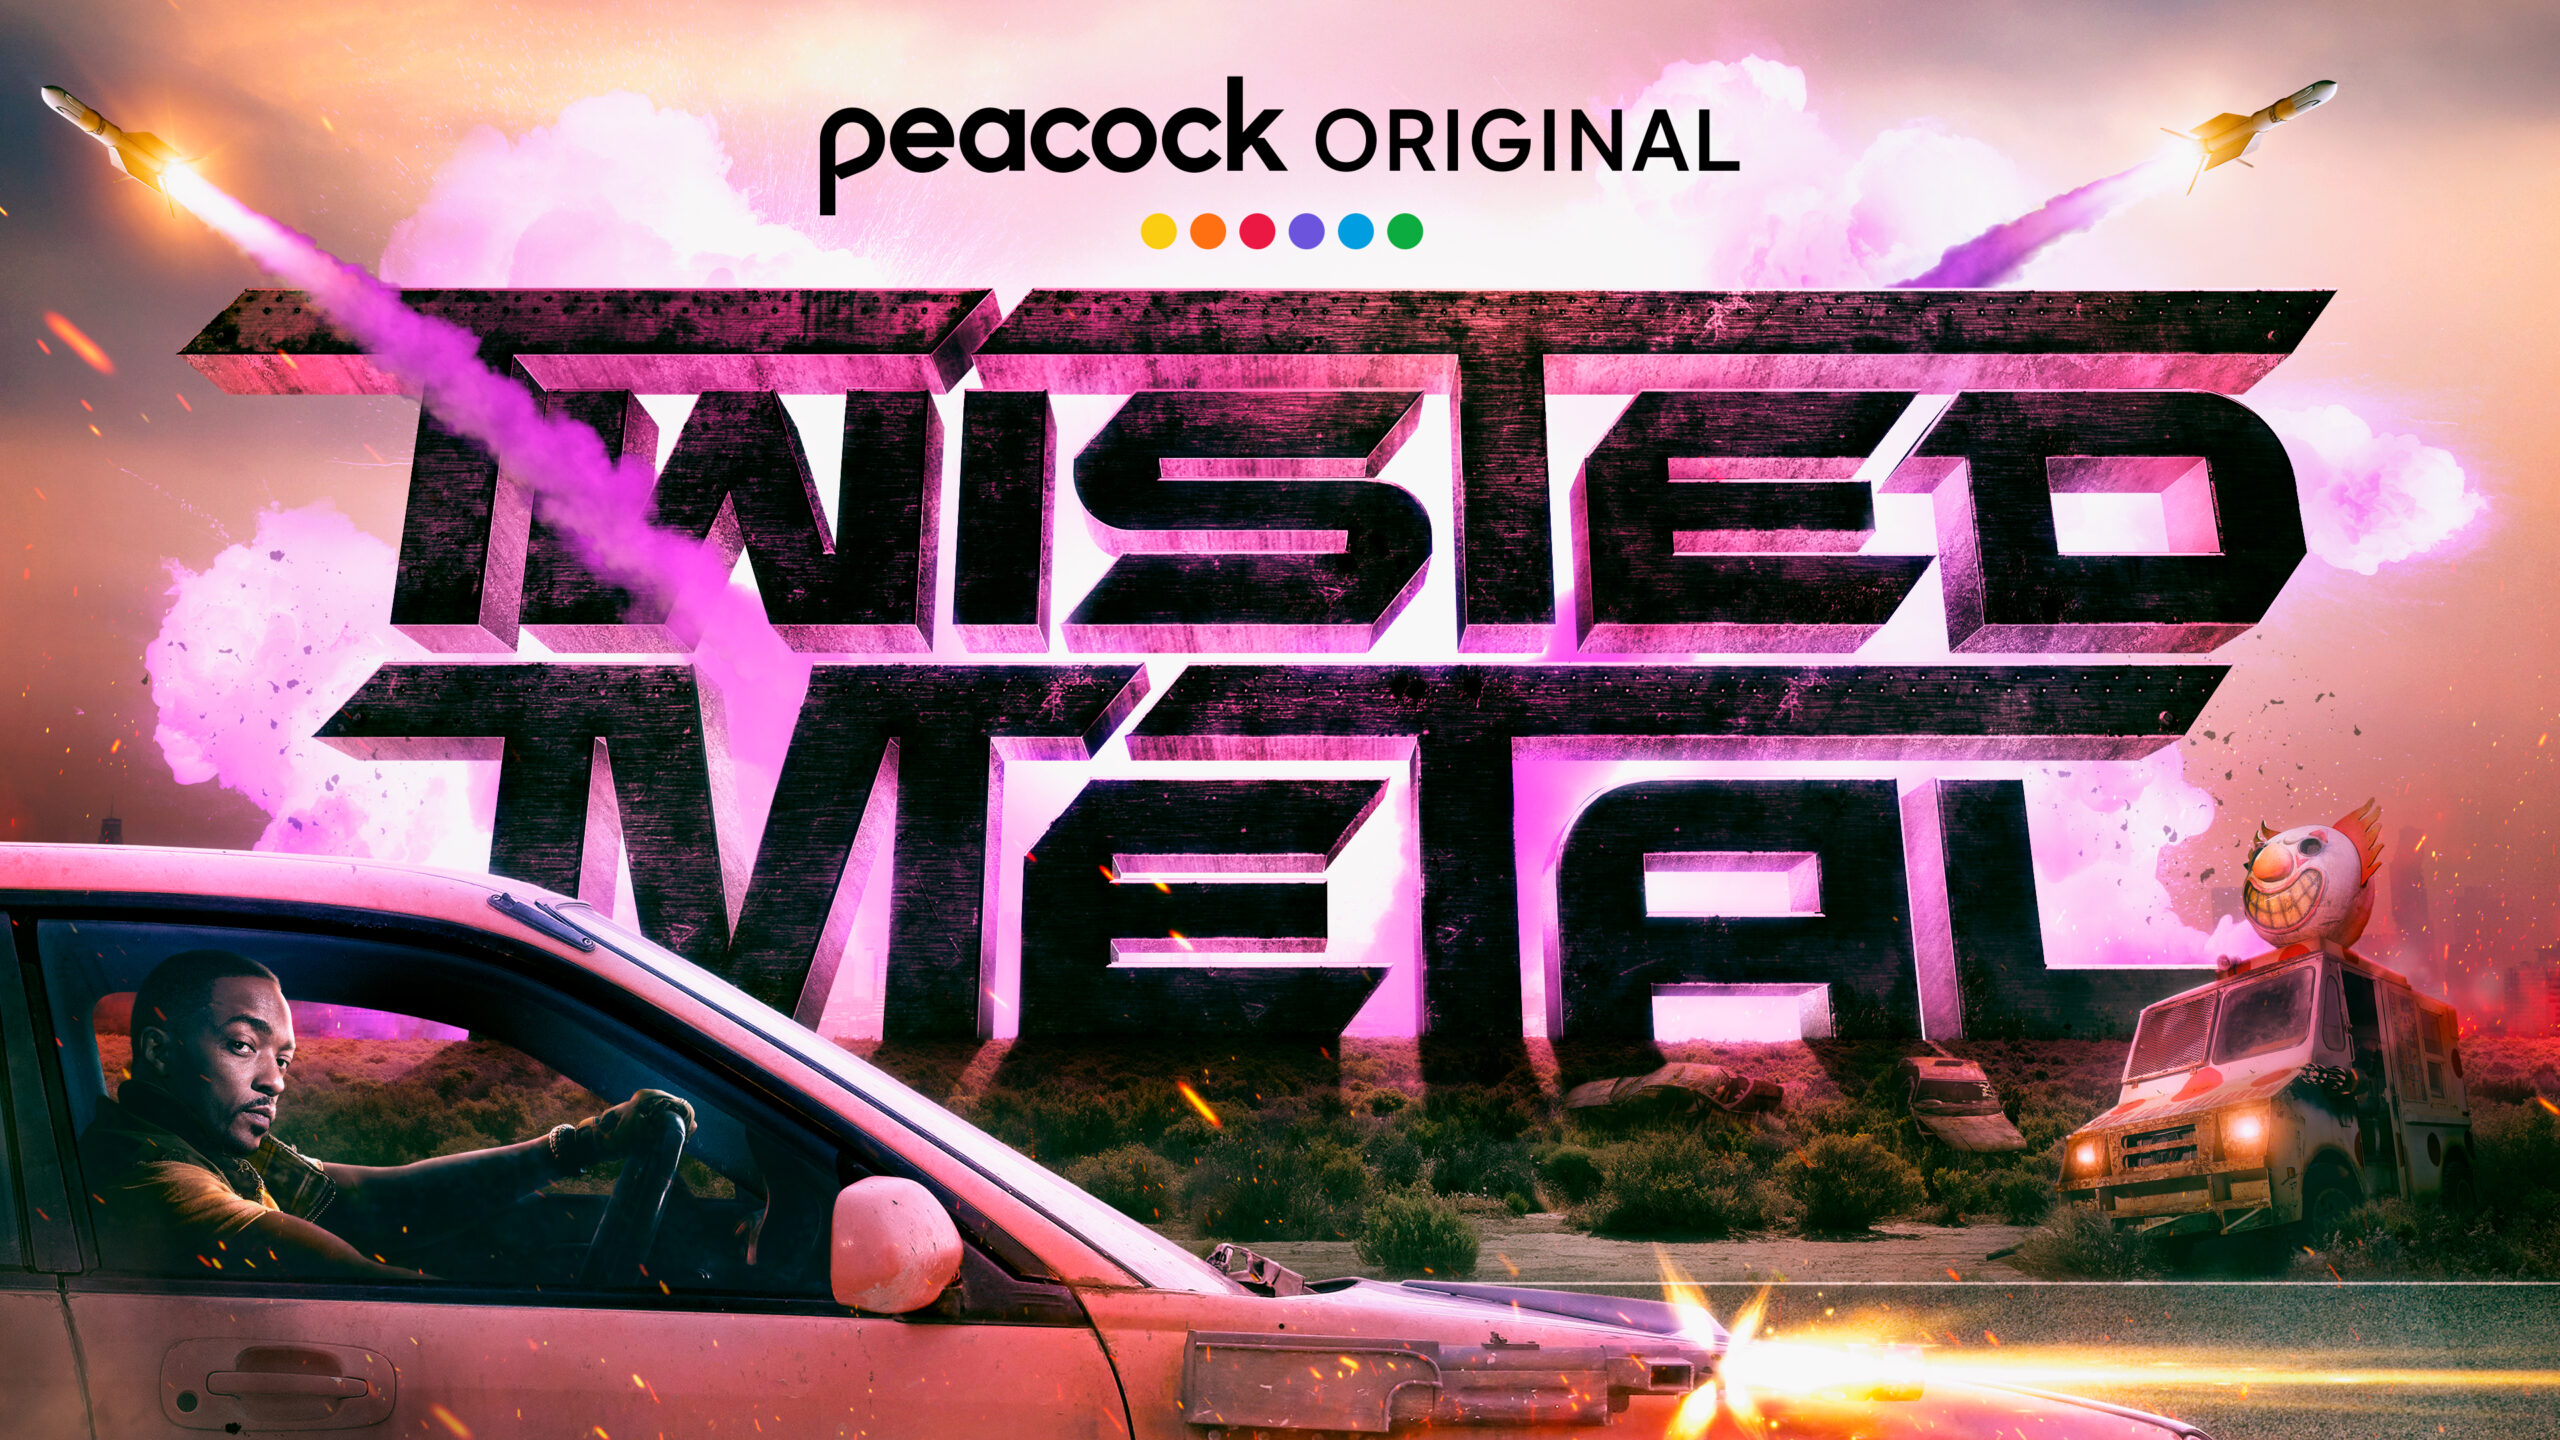 Peacock is Making a Series Based on The Twisted Metal Games